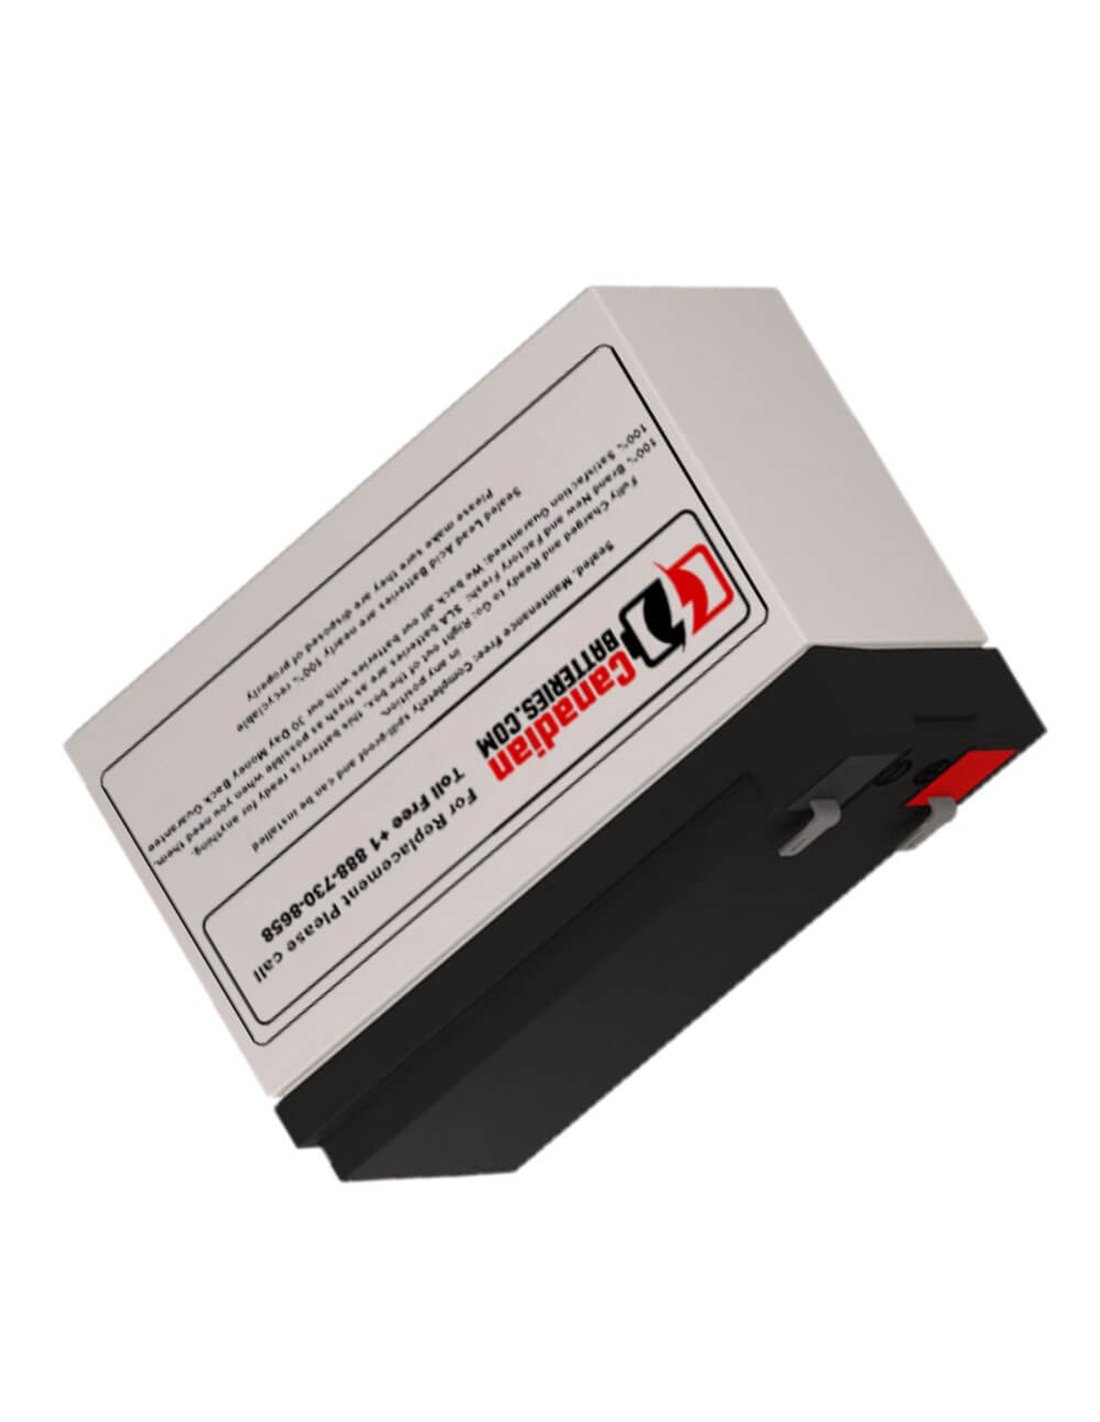 Ap330 Battery Replacement For Apc Smart Ups